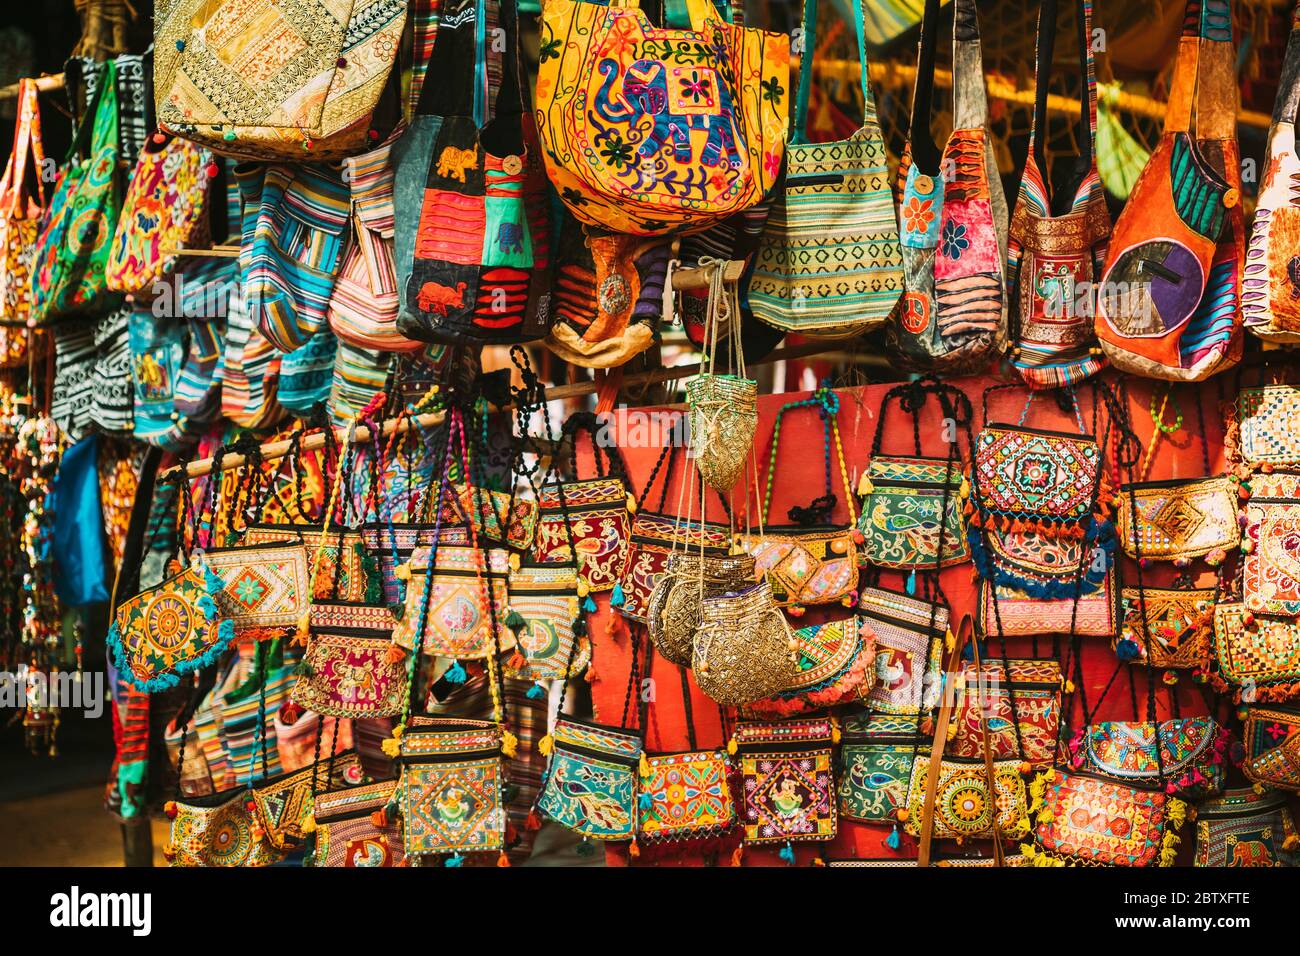 Goa, India. Traditional Store Market With Hand-sewn Bags Different Colors  And Sizes. Popular Souvenirs From India Stock Photo - Alamy